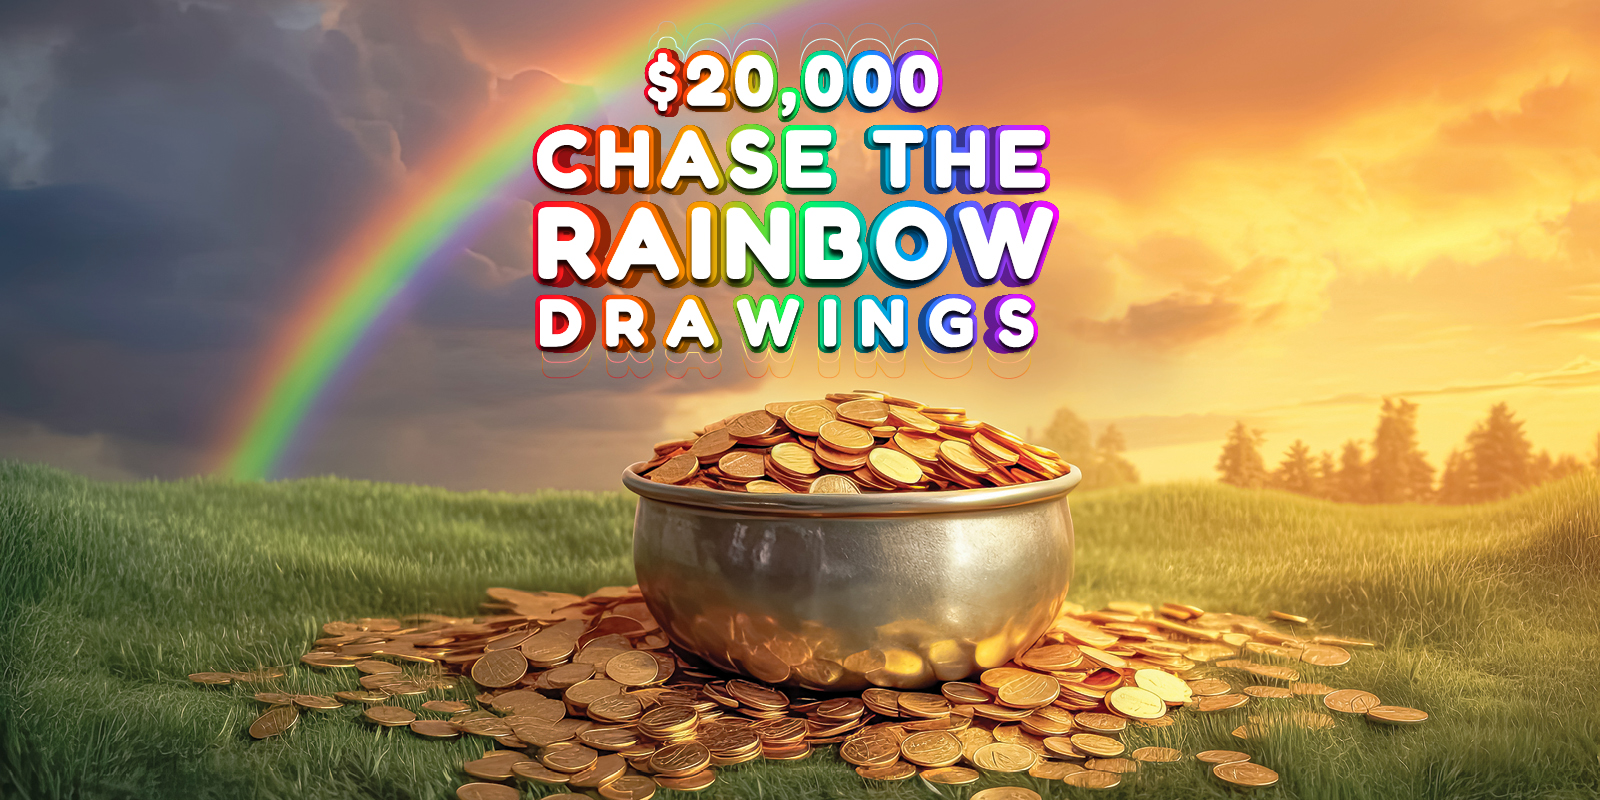 Chase the Rainbow creative showing a pot of gold and a rainbow